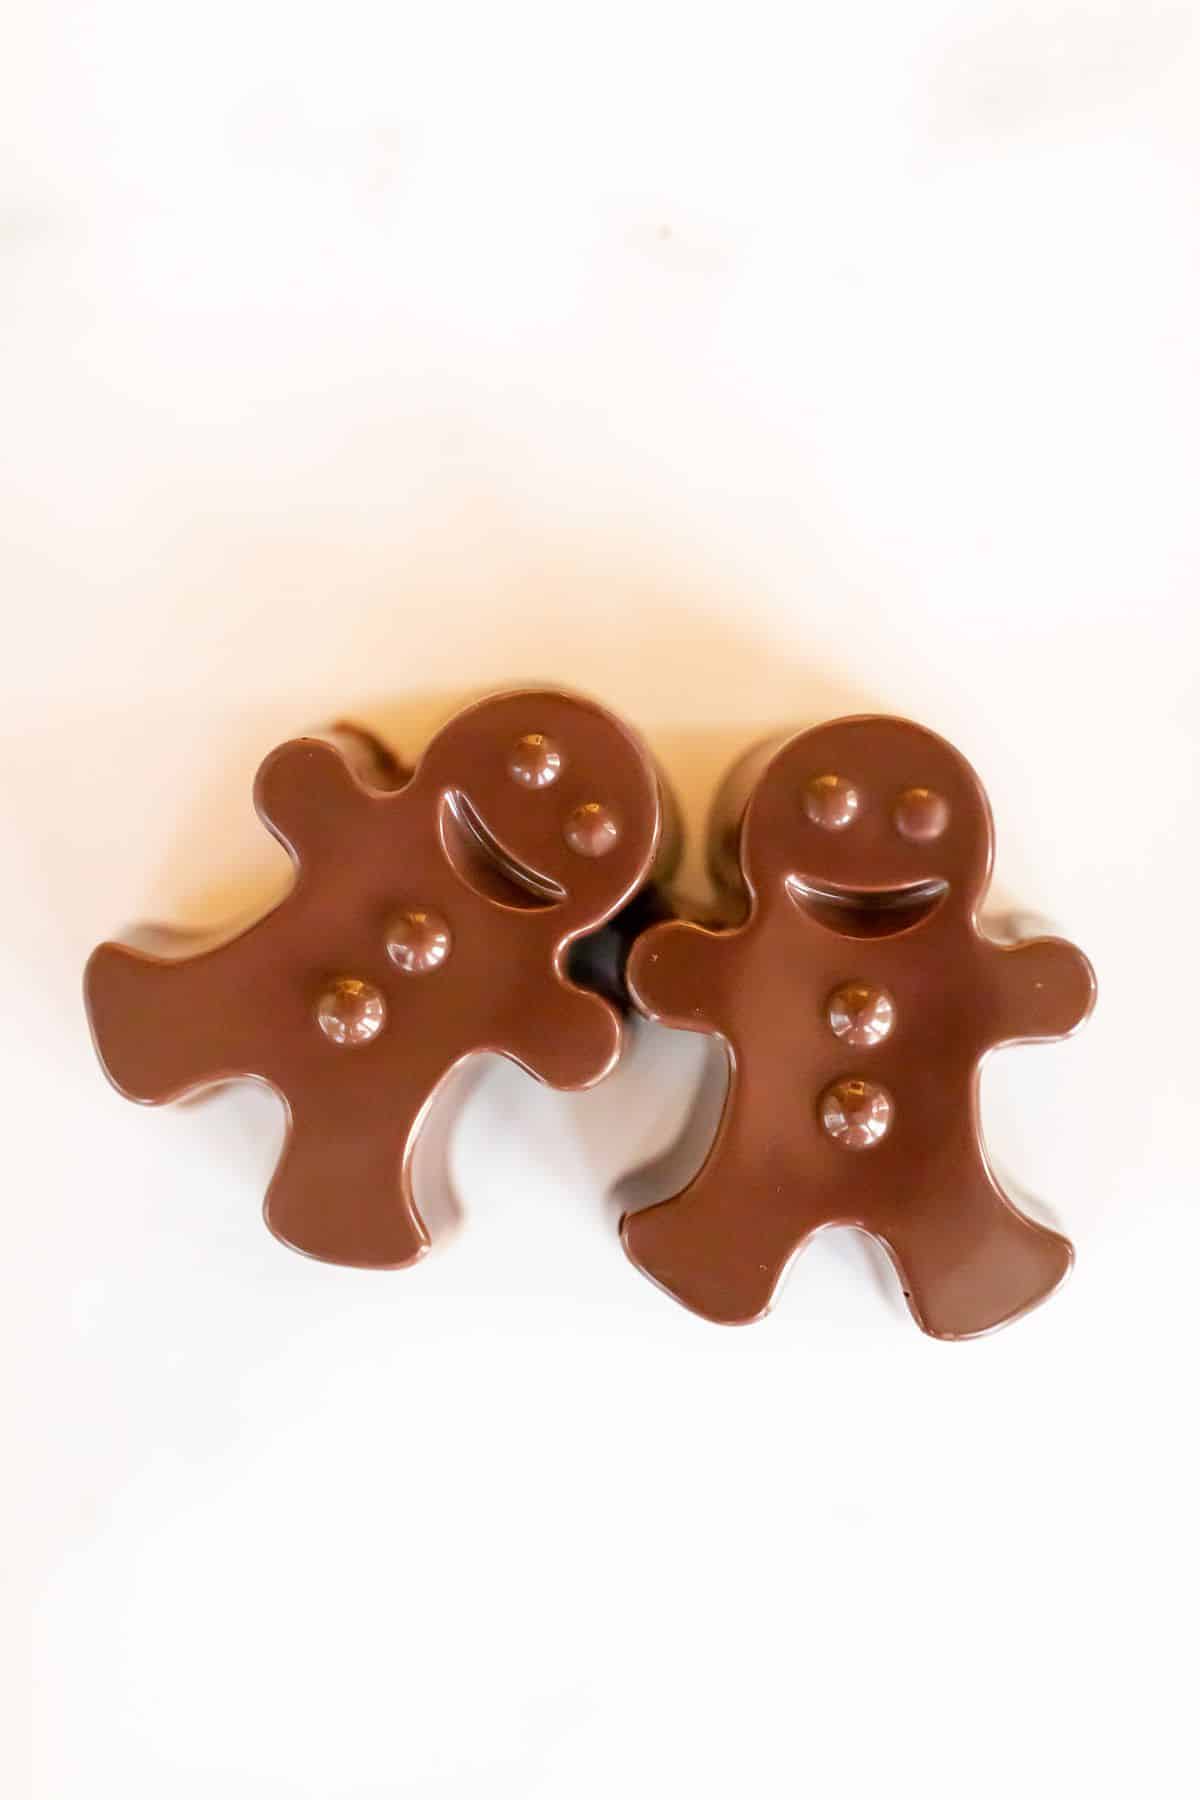 A pair of dark chocolate hot chocolate bombs shaped as gingerbread men on a white marble surface.